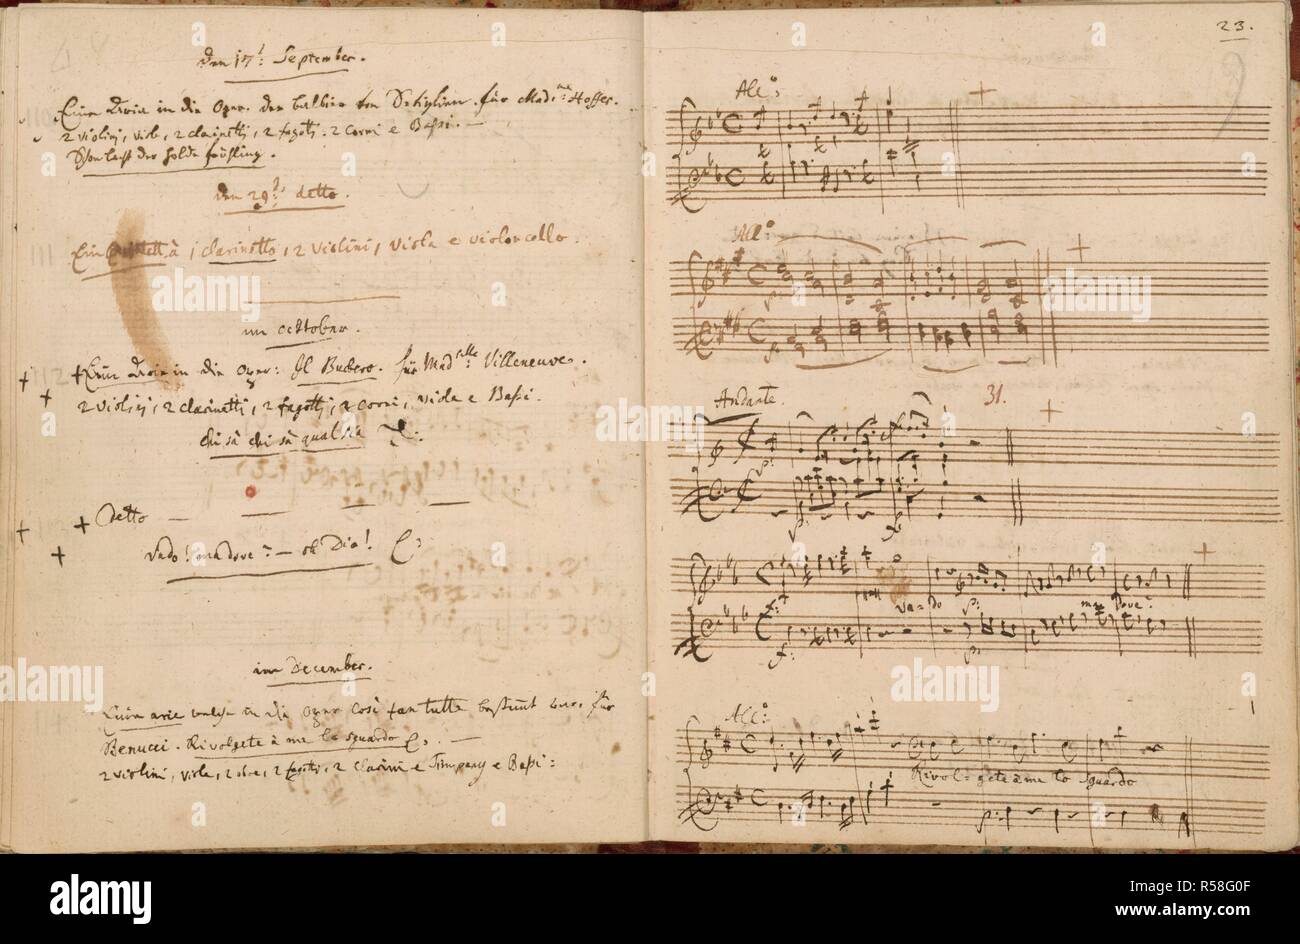 Mozart's Thematic Catalogue. VerzeichnÃ¼ss aller meiner Werke. 1784-1791.  {Whole opening] Pages for 17 September to December 1789 with Mozart's  autograph thematic catalogue of his works, with dates and description on  the left